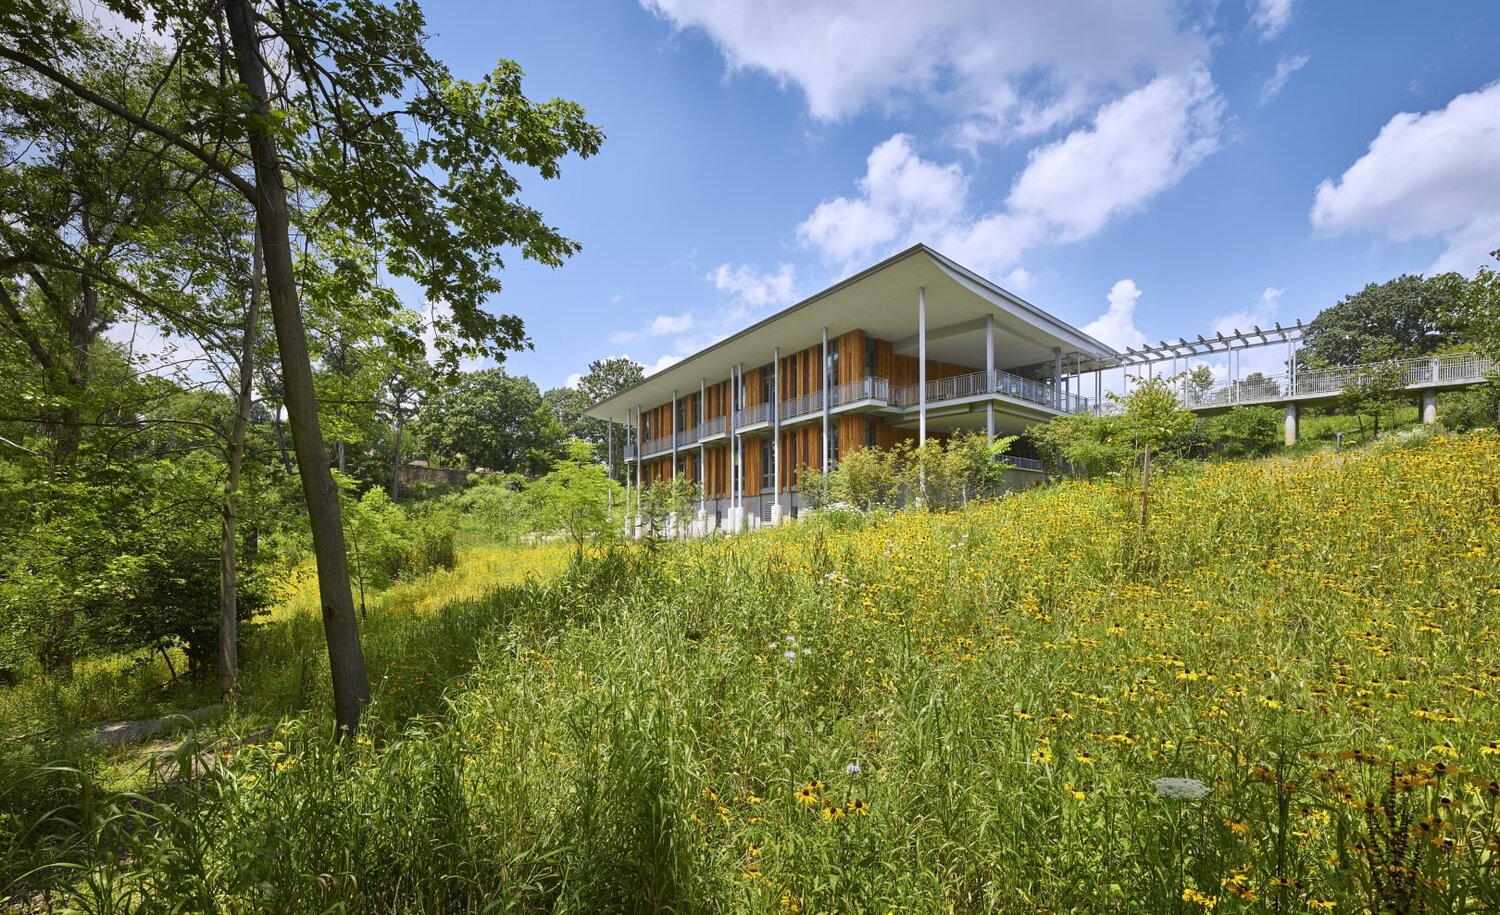 Frick Park Environmental Center - https://www.aia.org/showcases/6130374-frick-environmental-center. I worked here my freshman year summer with Pittsburgh Parks Conservancy.